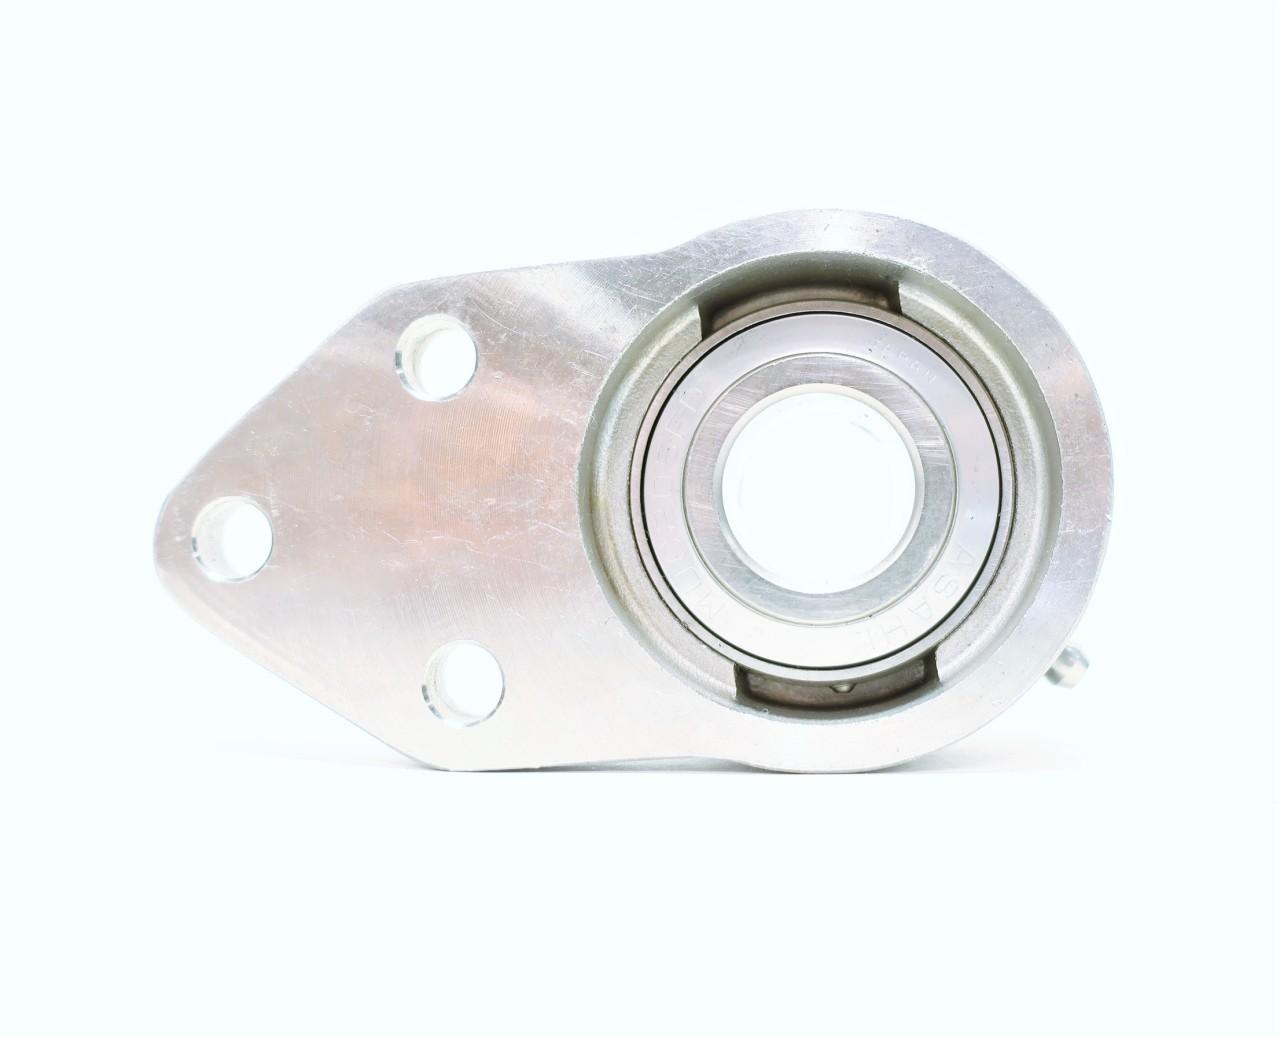 3-Bolt Details about   New in Box AMI MUCFB205-15 Flange Bearing 